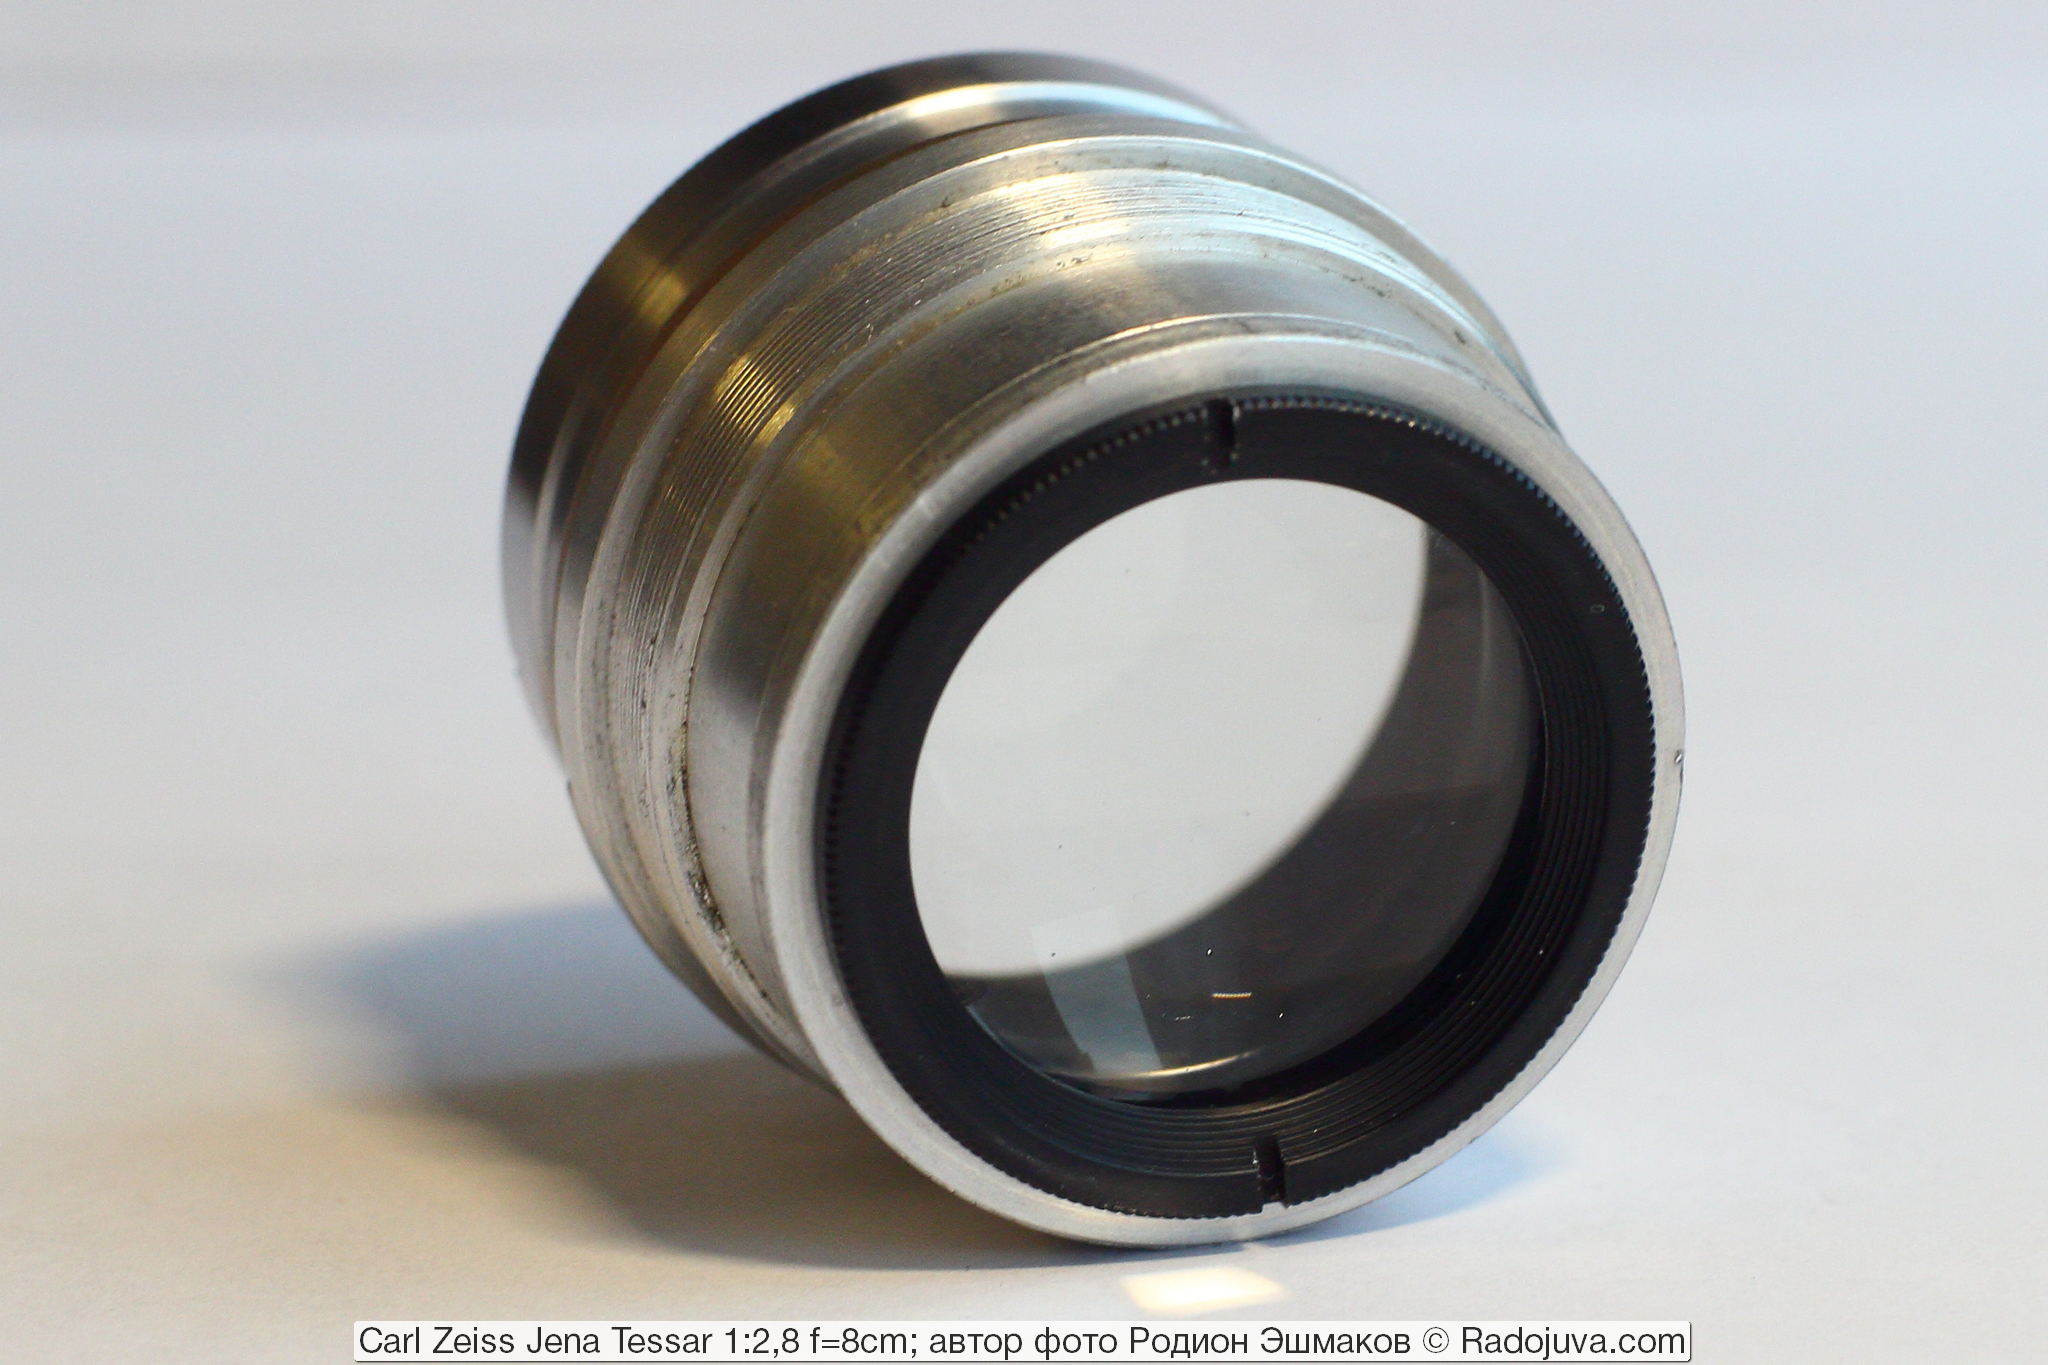 Rear view of the lens lens of the projection Tessar 80 / 2.8.